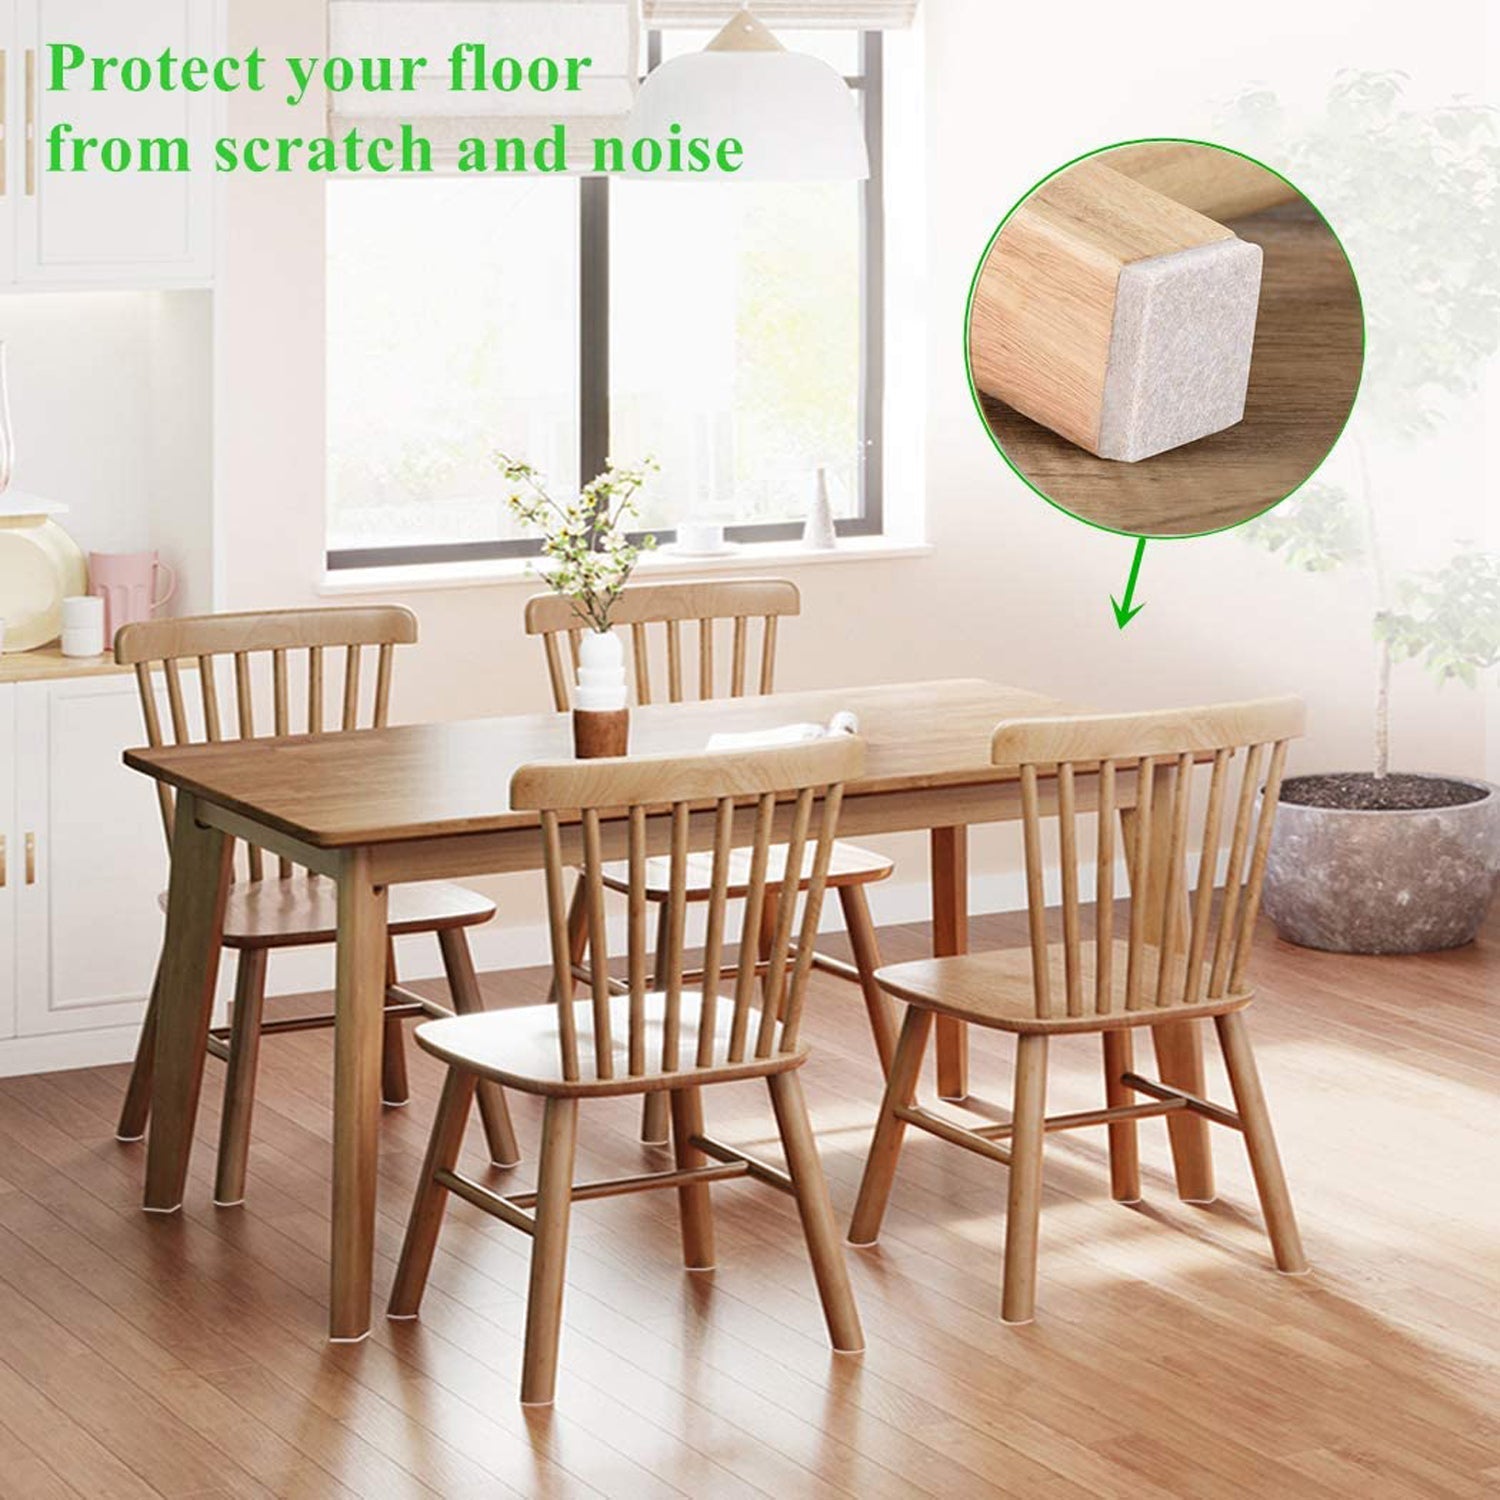 9050 FURNITURE PAD SQUARE FELT PADS FLOOR PROTECTOR PAD FOR HOME & ALL FURNITURE USE 